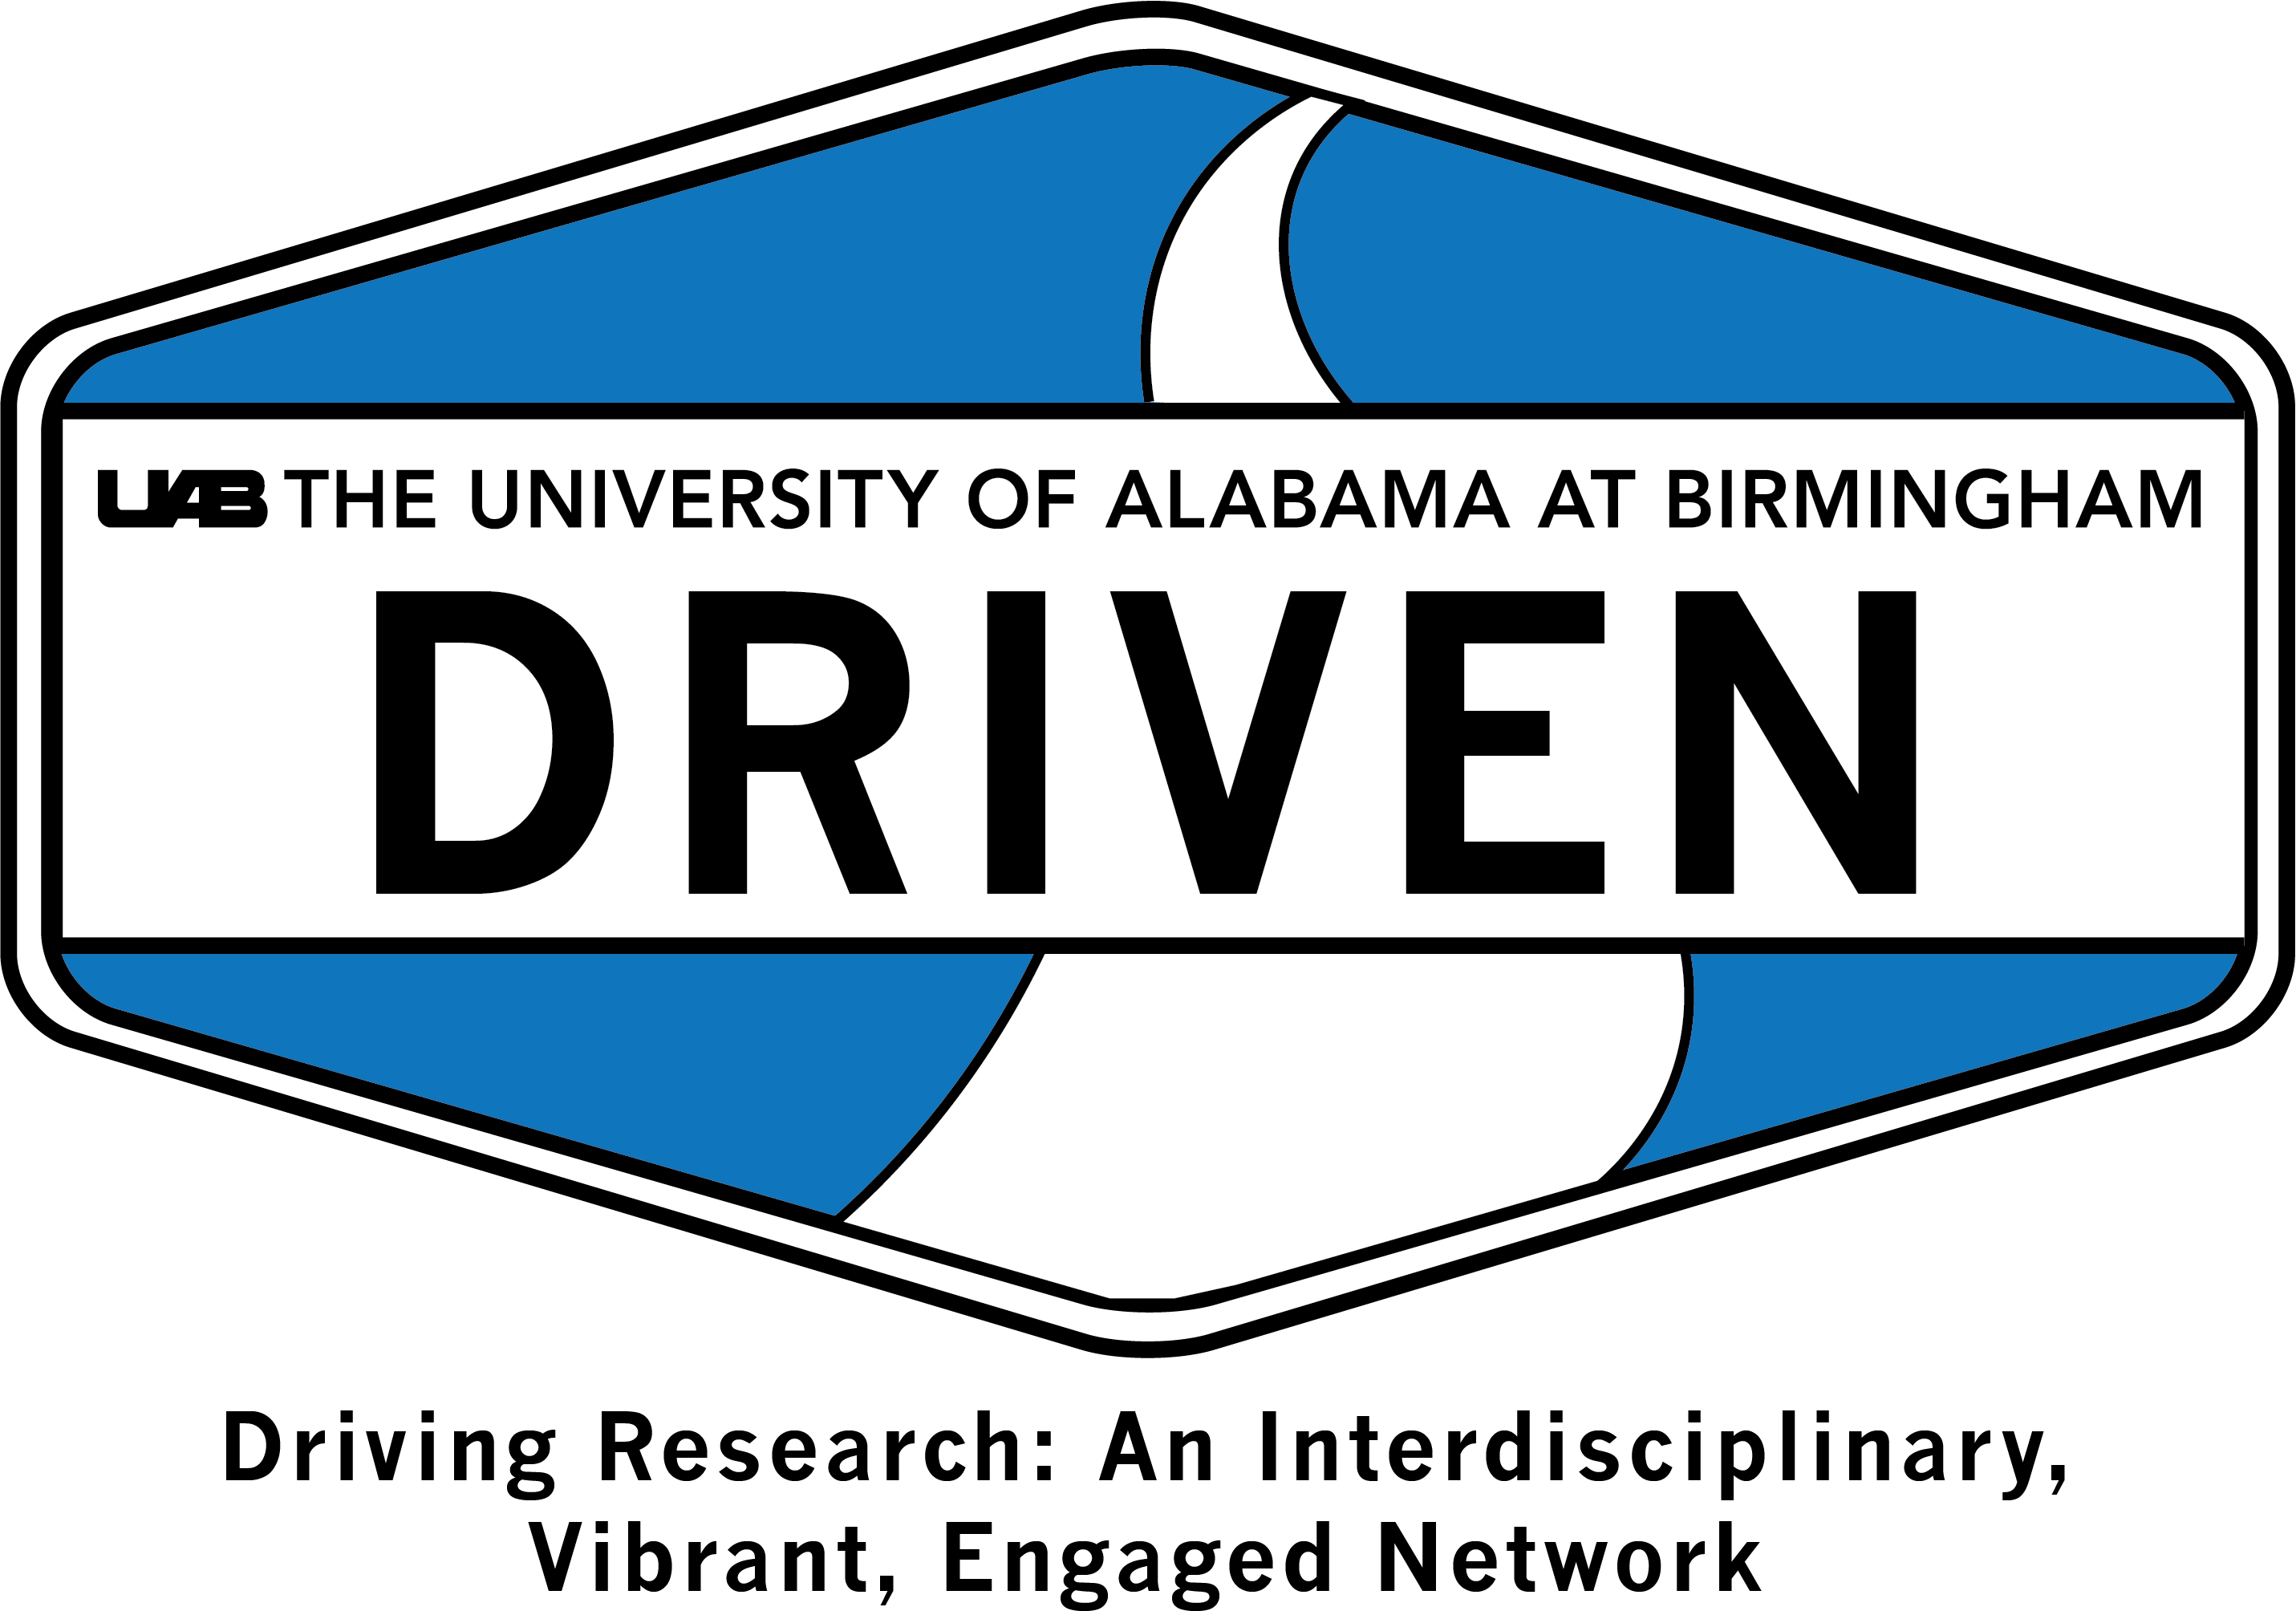 September’s Forum Introduces DRIVEN — Driving Research: An Interdisciplinary, Vibrant, Engaged Network